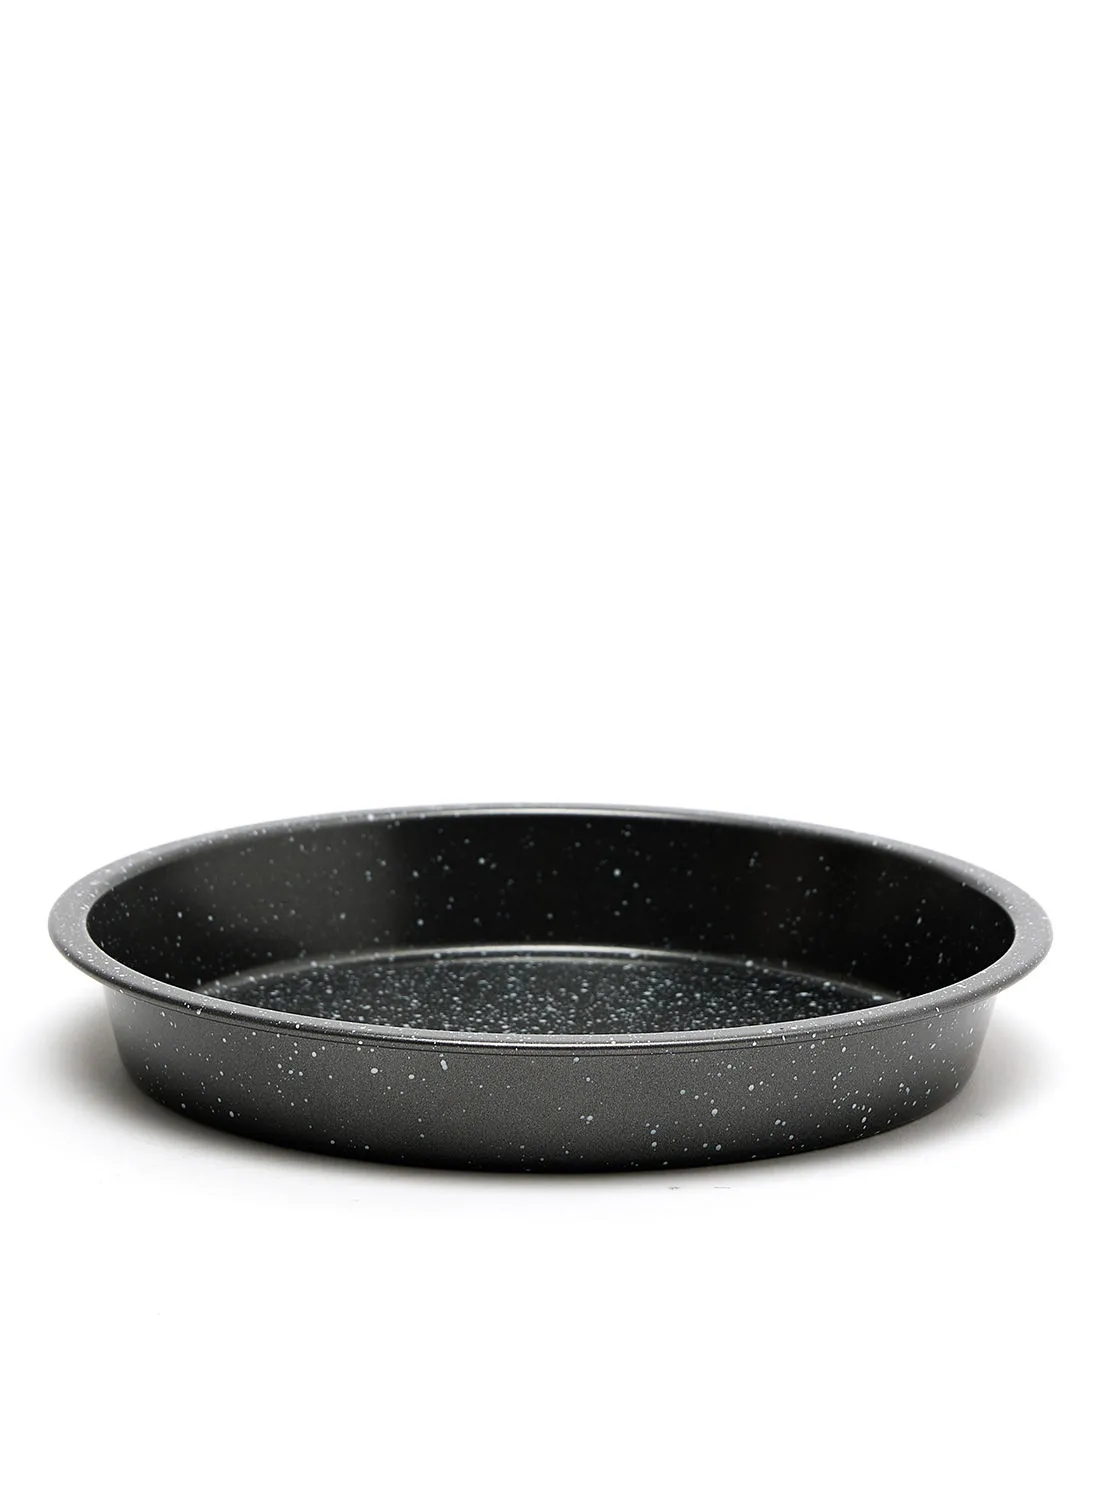 noon east Oven Pan - Made Of Carbon Steel - Round 23 Cm - Baking Pan - Oven Trays - Cake Tray - Oven Pan - Granite Dark Grey